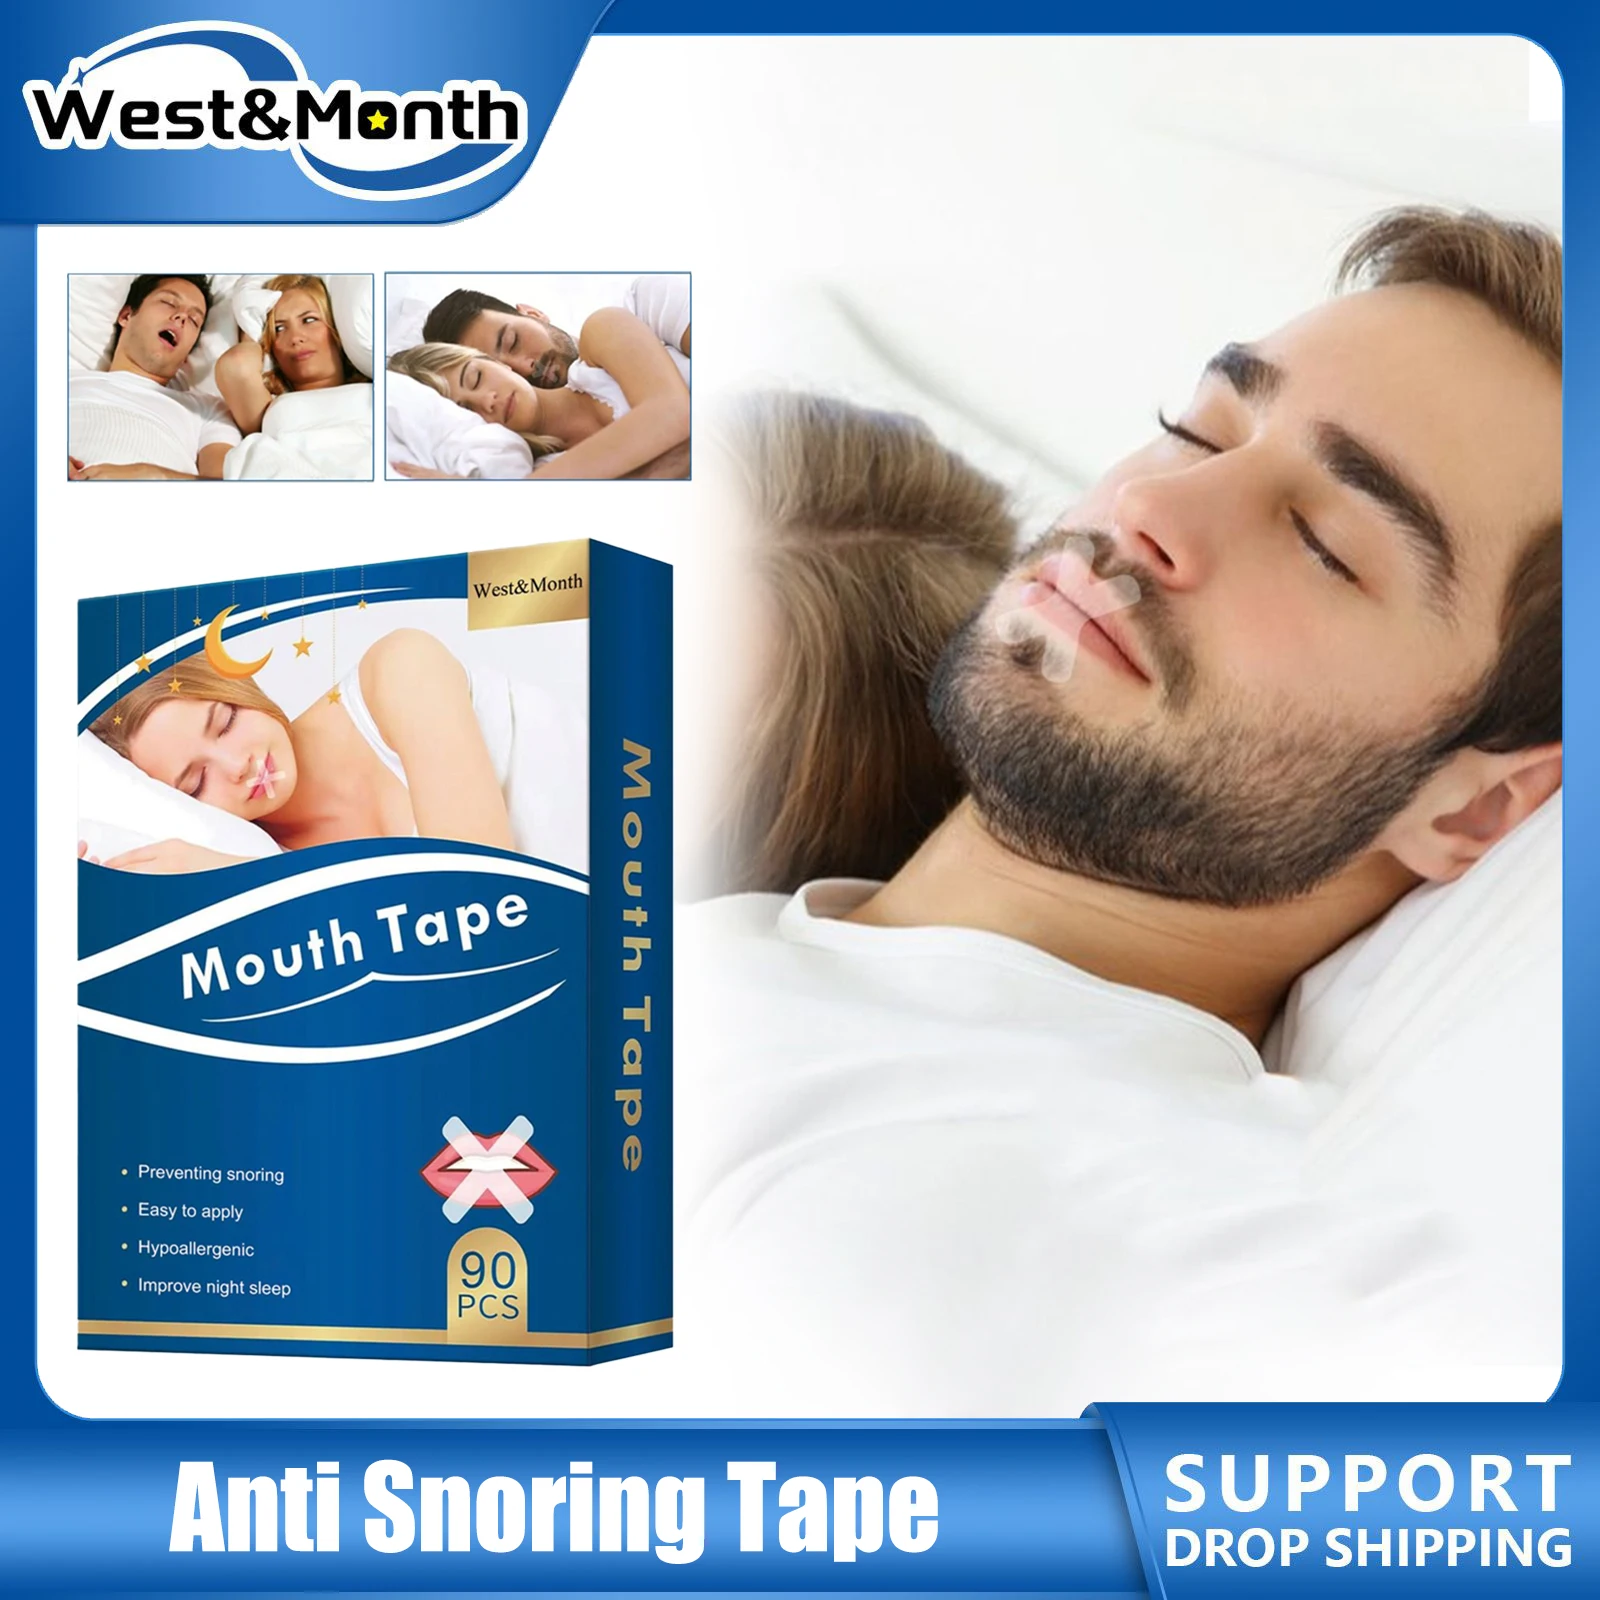 Anti Snoring Mouth Tape Through The Nose Effective Breathing Nighttime Sleeping Reduce Snore Health Care Relax Body Sleep Strip 8pcs set silicon snore ceasing stopper nose clip advanced conical shape nontoxic harmless and odorless for good night sleep